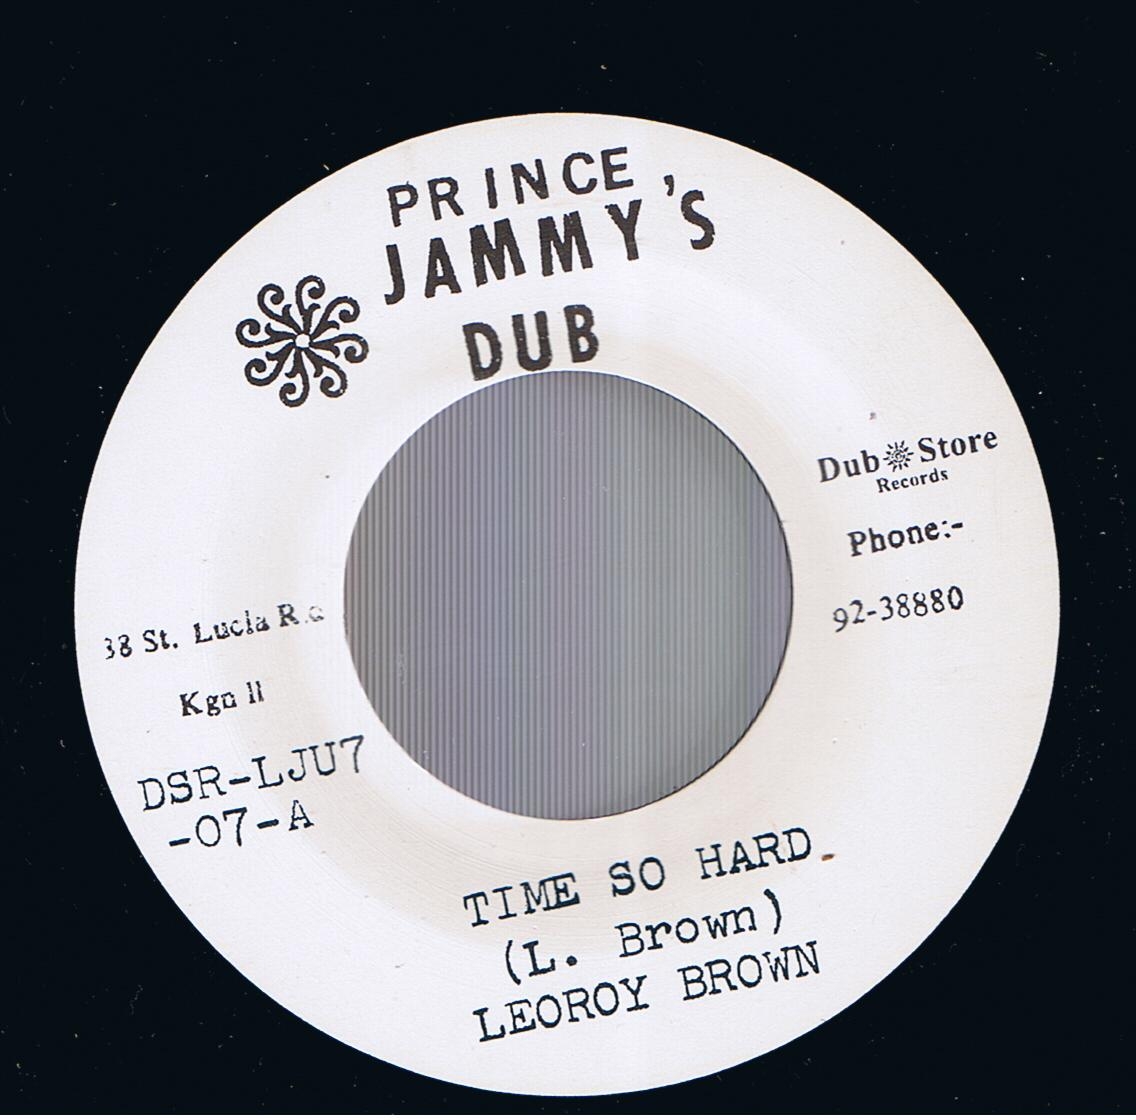 Leroy Brown - Time So Hard / Super Power Band - Time So Hard Version (7") 